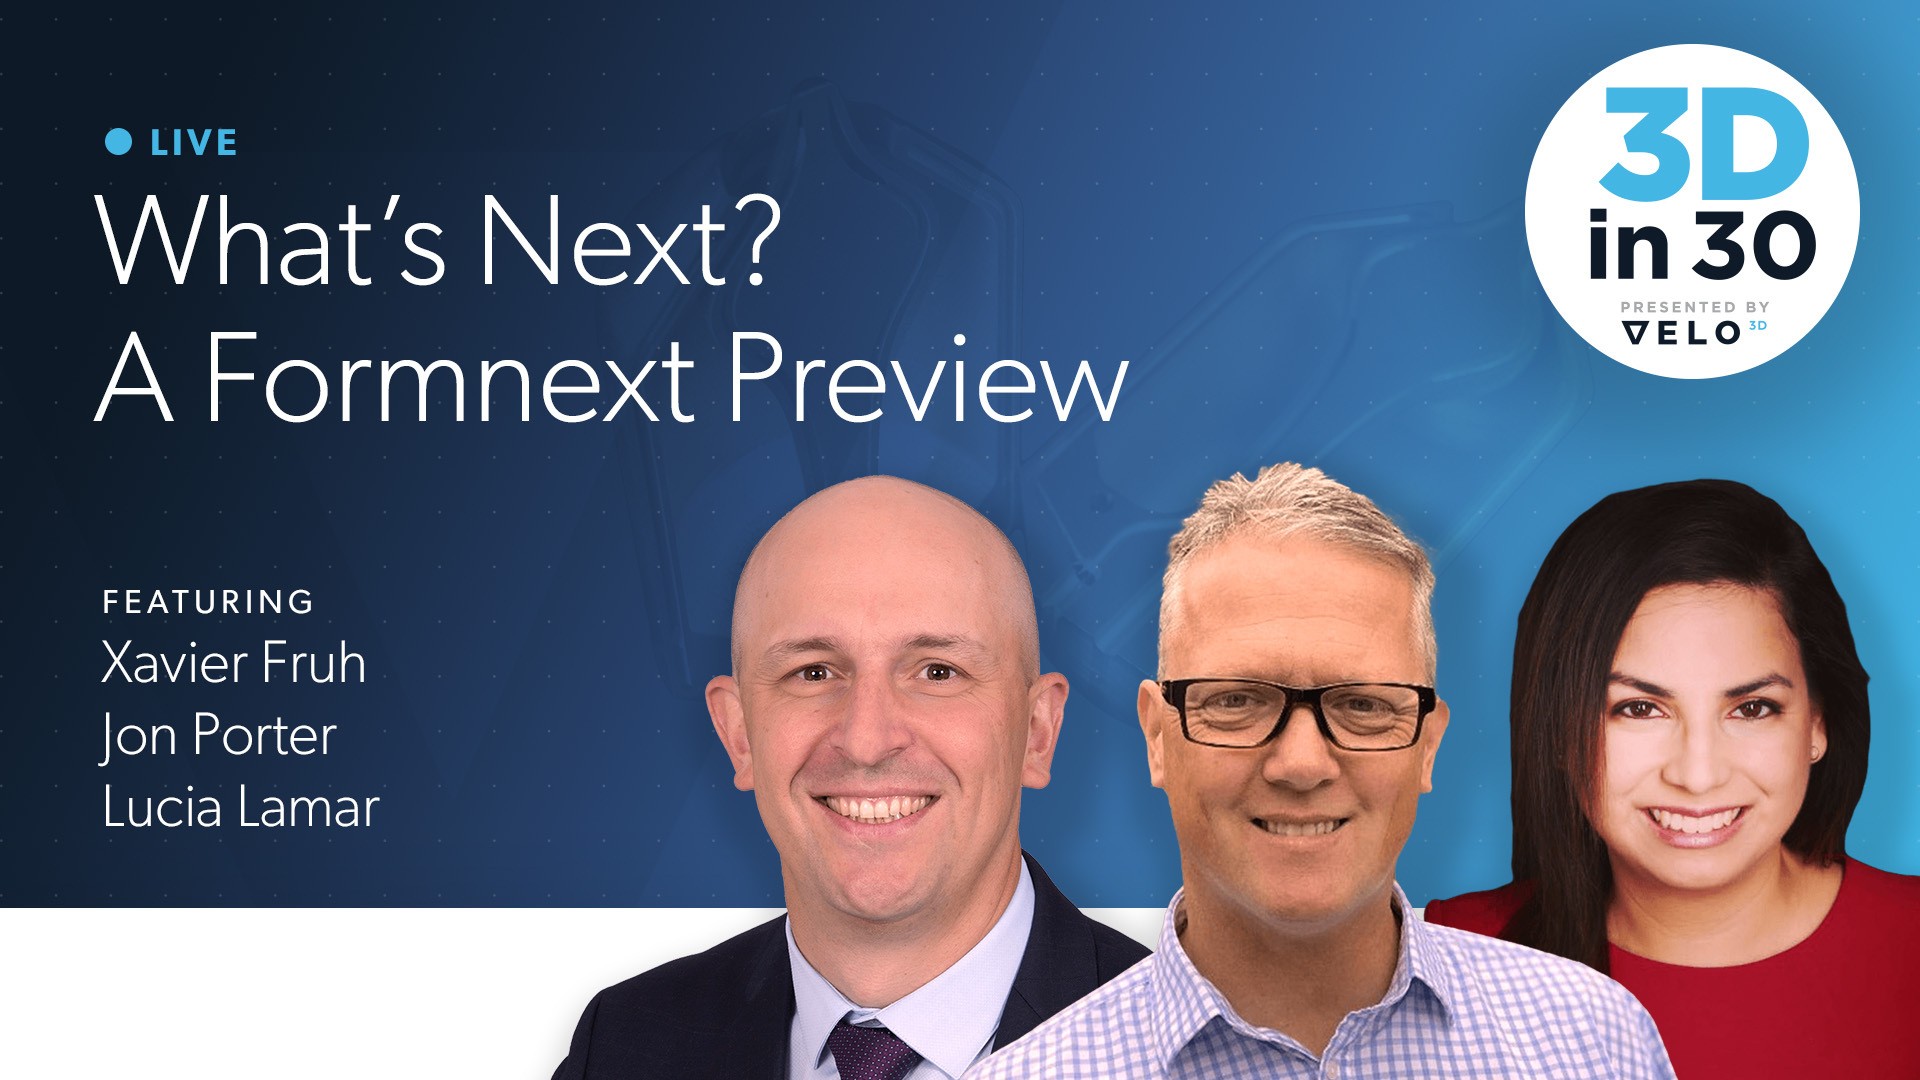 What’s Next – A Fornmext Preview